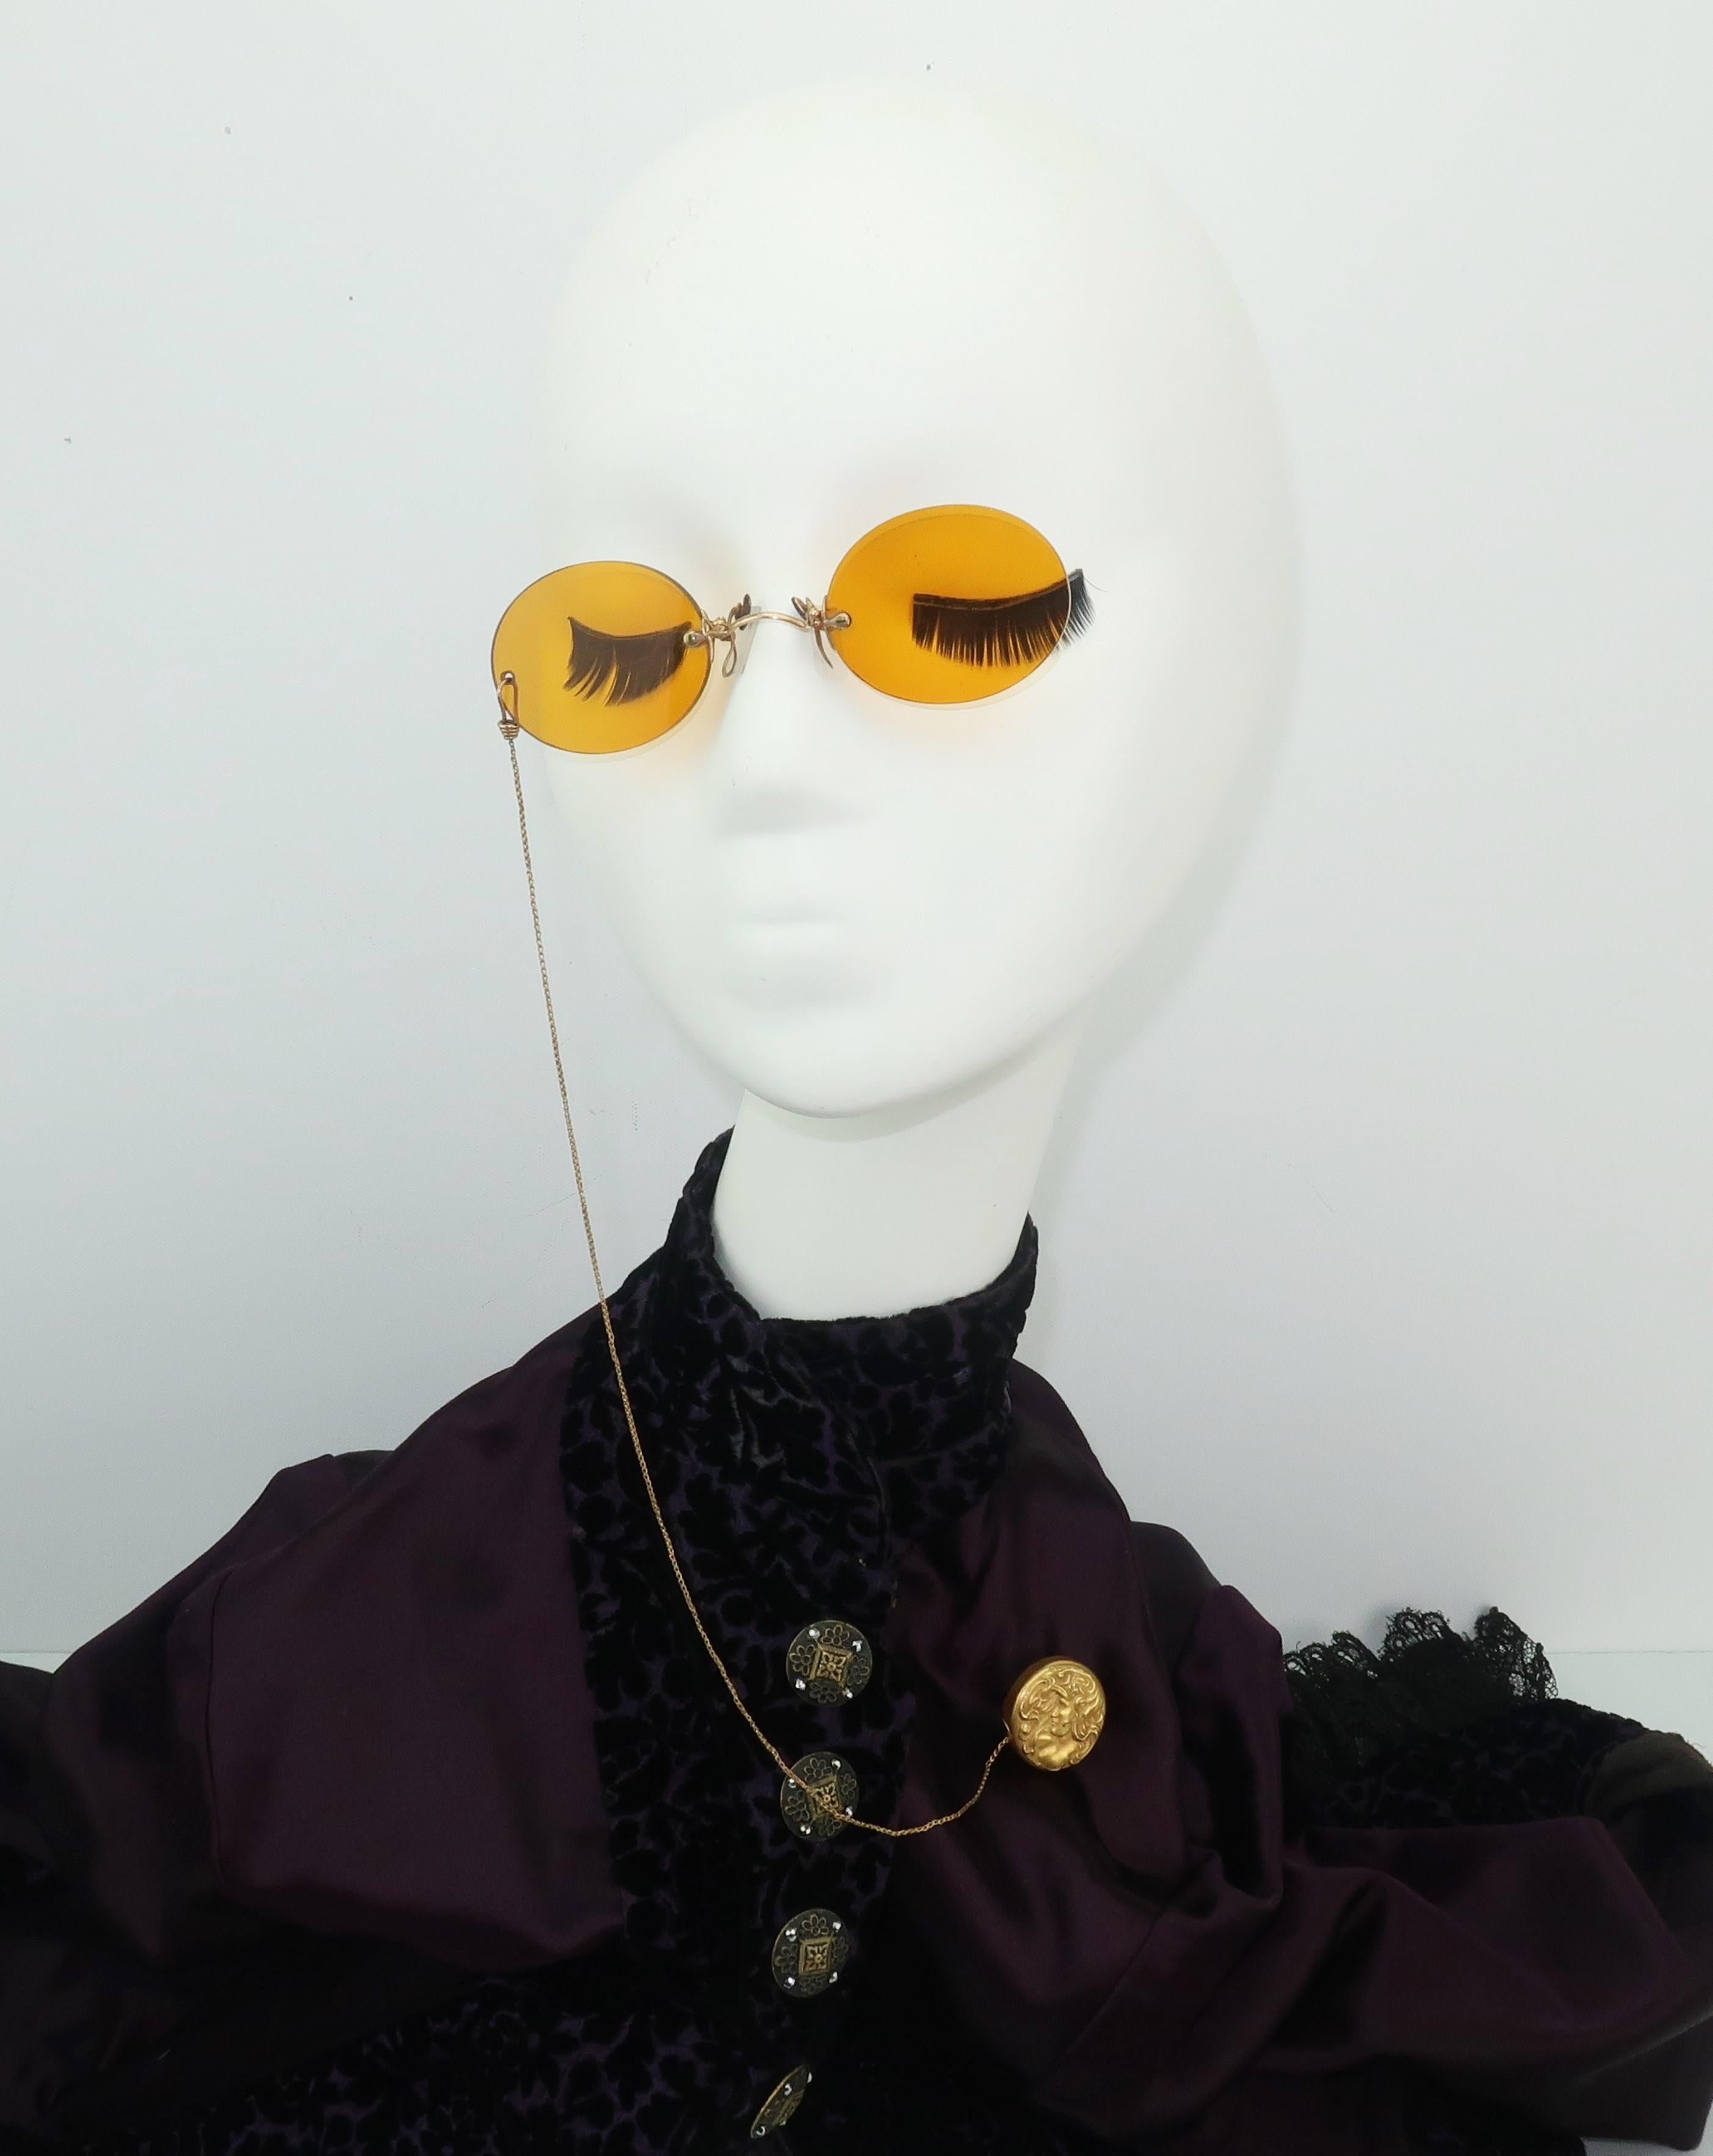 A rare fashionable gadget from the past!  These 1903 Ketcham & McDougall amber glass pince nez sunglasses were always in reach for a lady of means at the turn-of-the-century.  They are attached to an 'eye glass reel' ... a retractable fob chain and